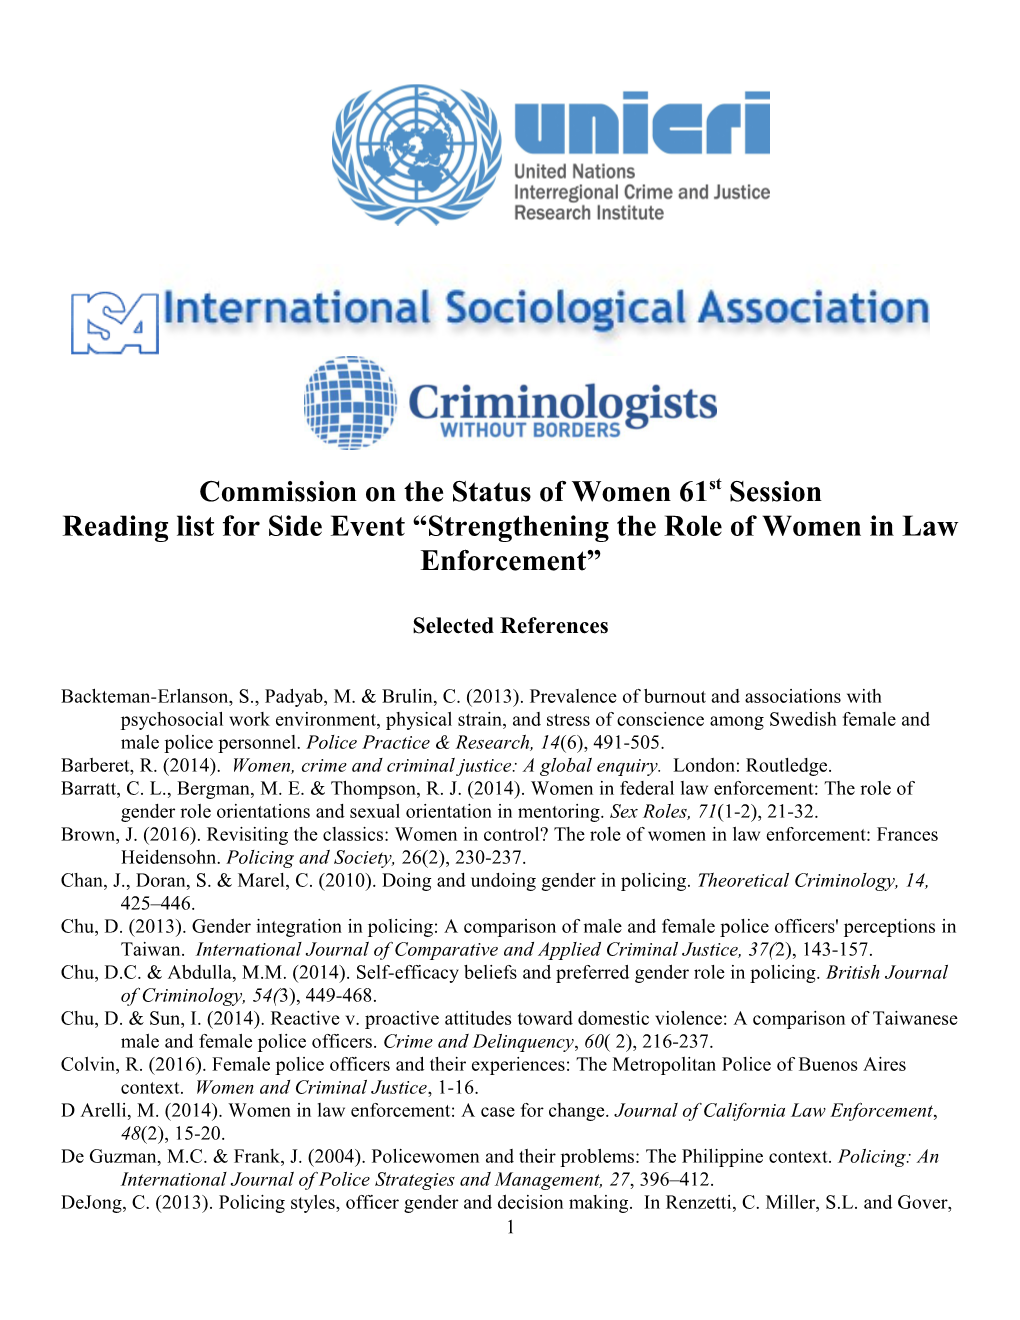 Commission on the Status of Women 61St Session